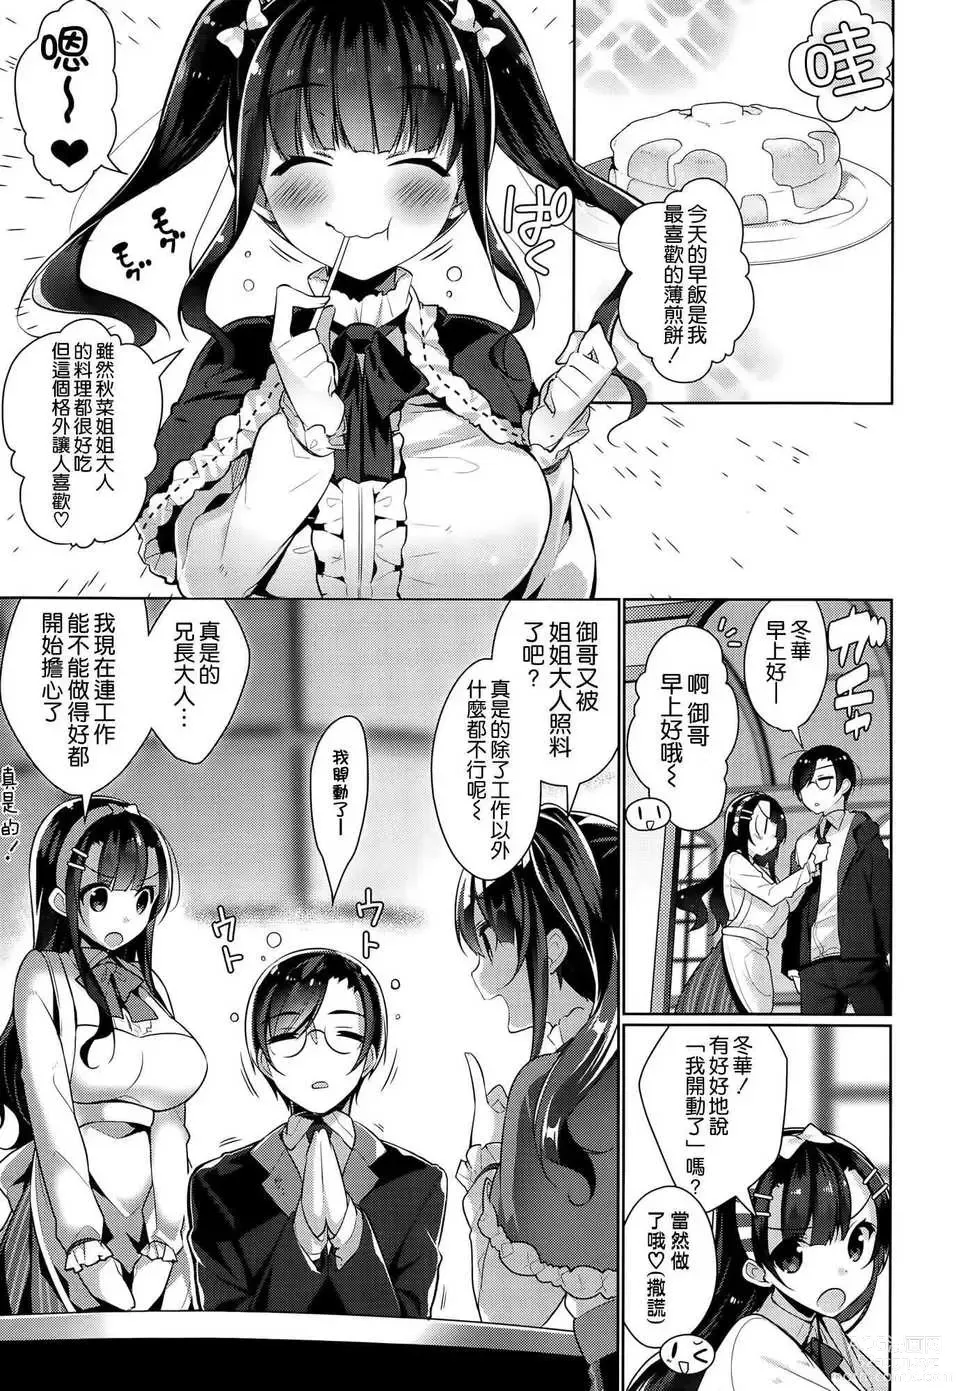 Page 5 of manga Aki na Dere - Mysterious the forbidden carnal relationship